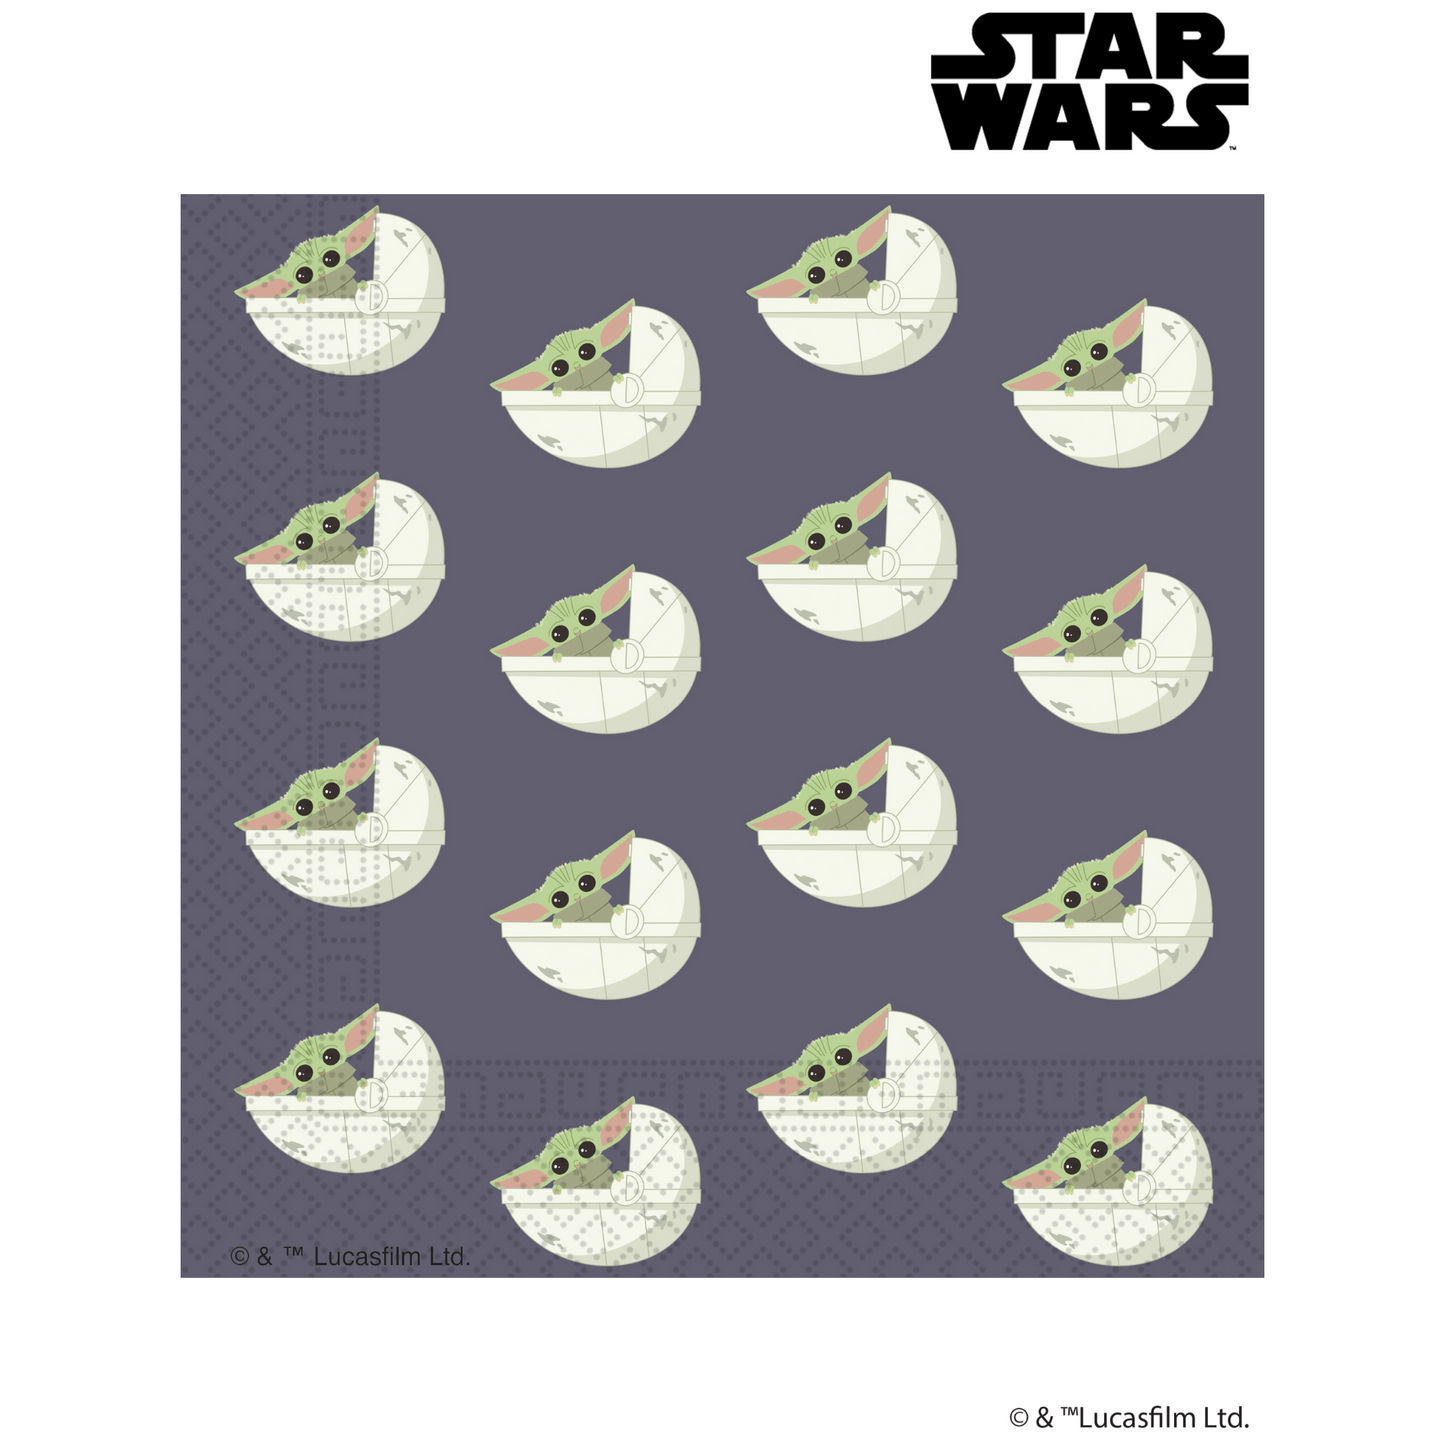 21856 - 20 X PAPER TWO-PLY NAPKINS STAR WARS: THE MANDALORIAN